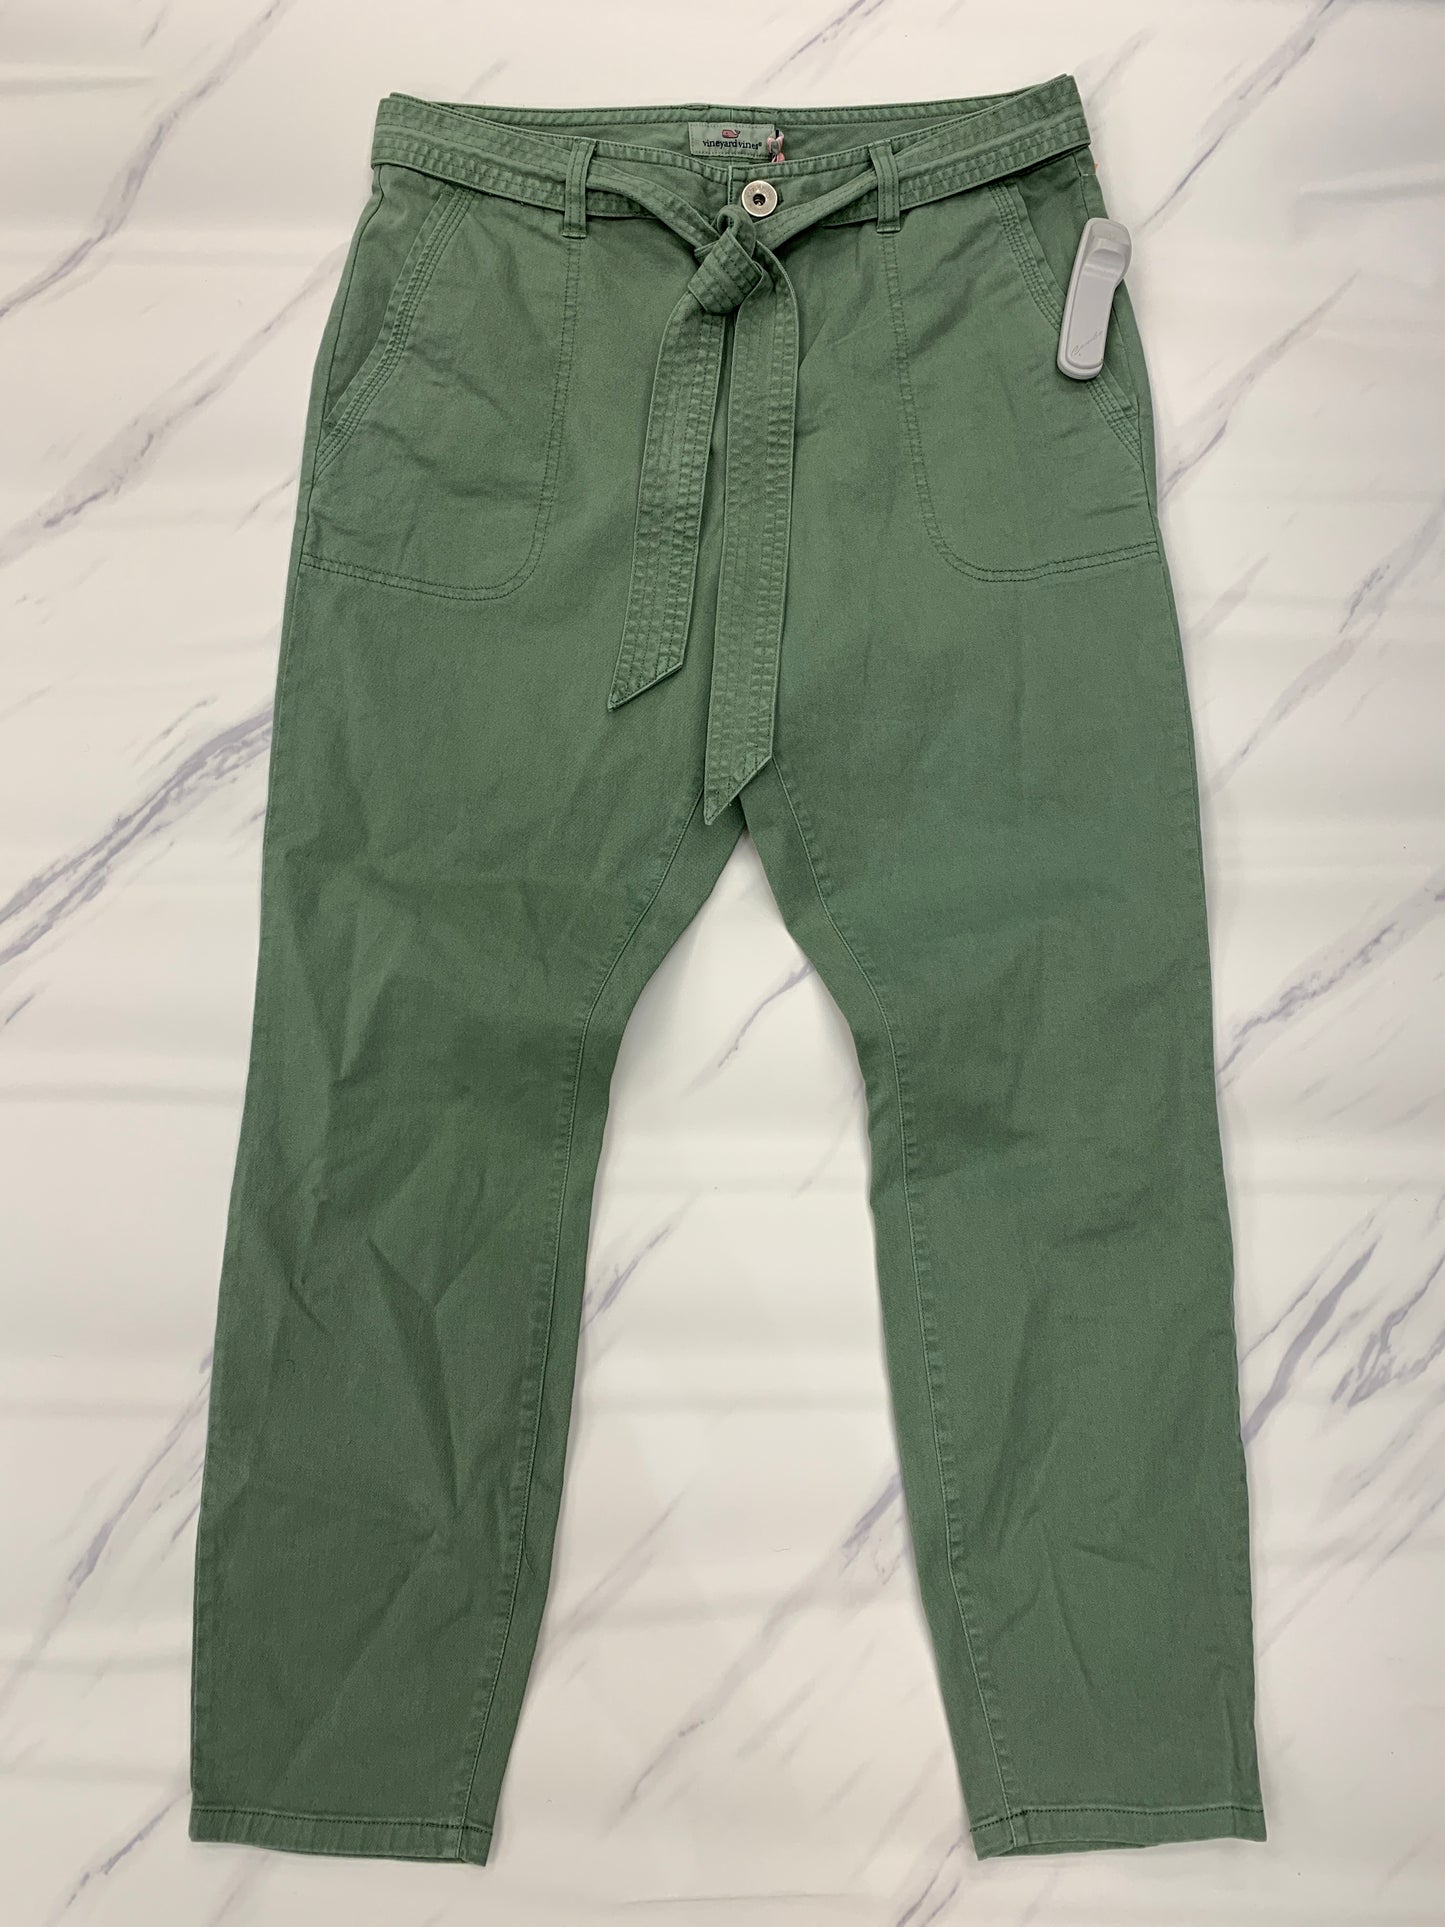 Pants Cargo & Utility By Vineyard Vines  Size: 8